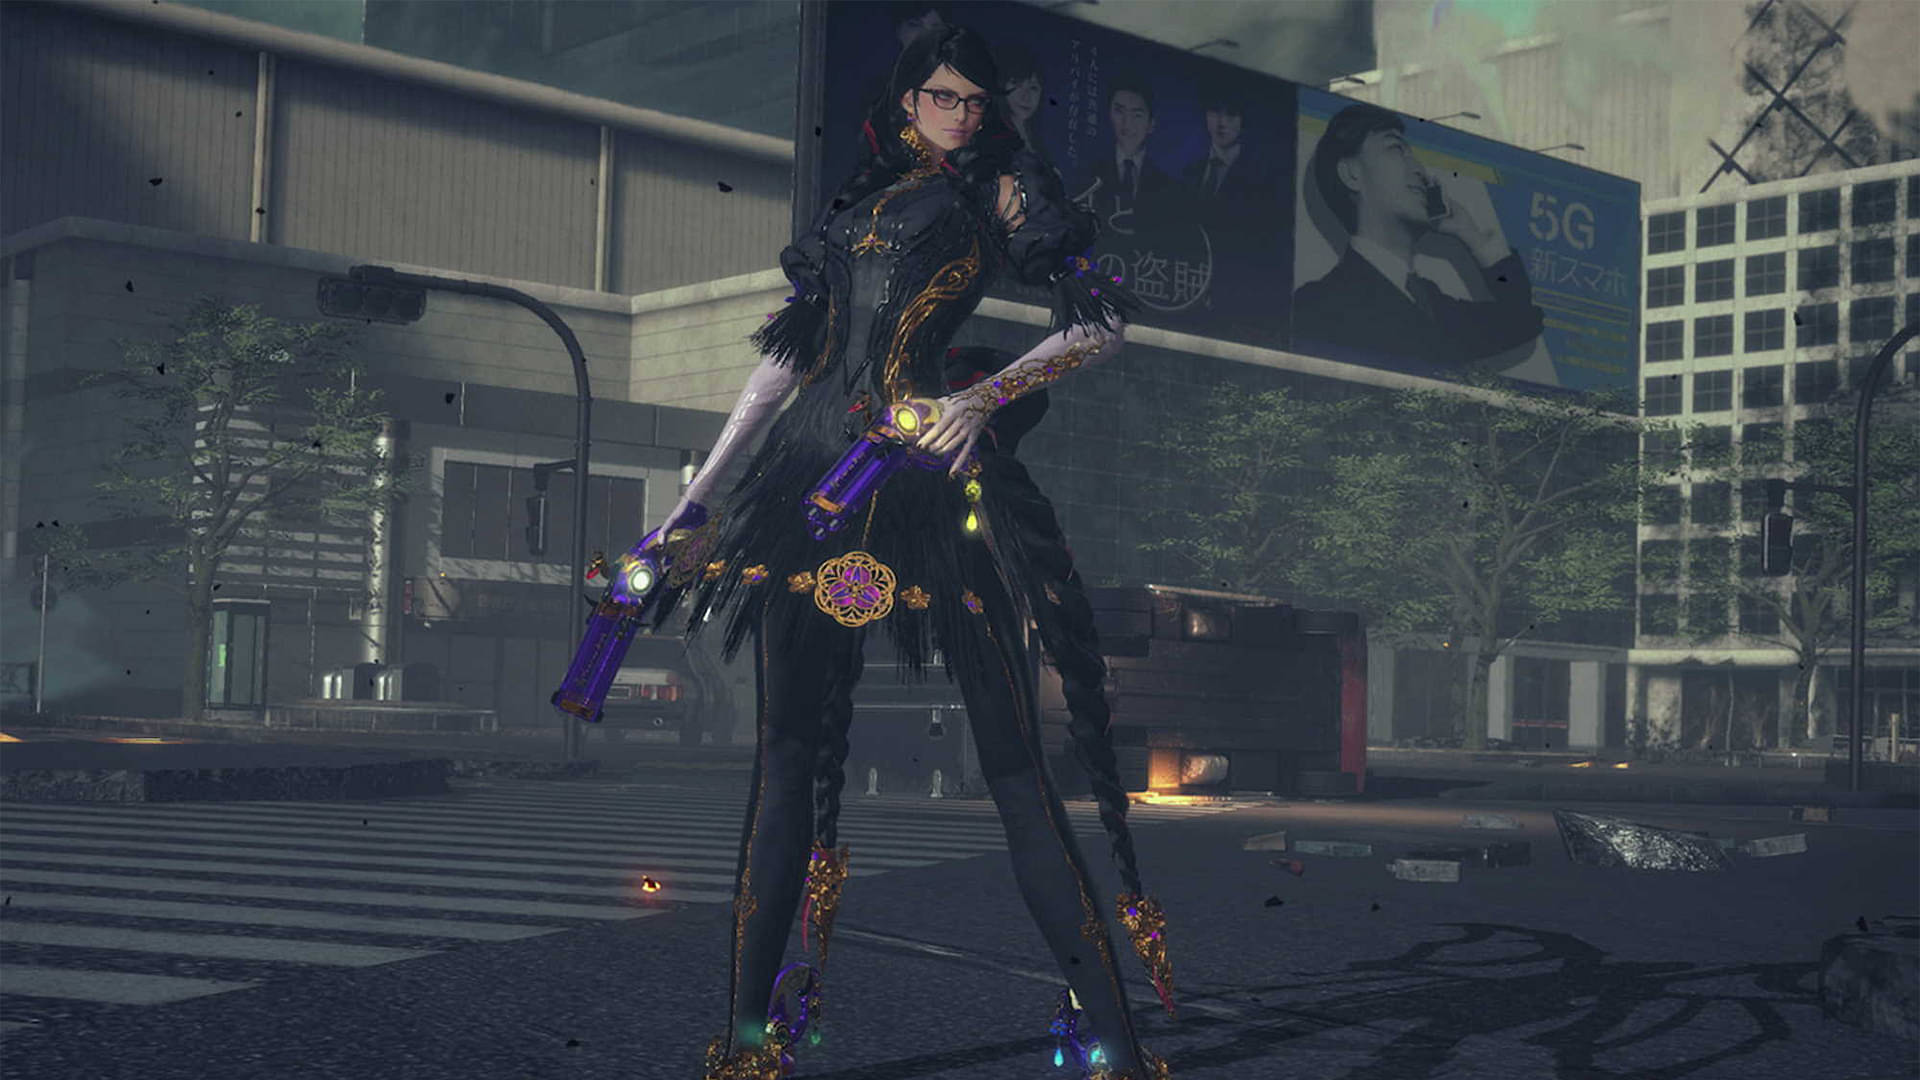 Bayonetta 3 Version 1.2.0 Is Now Live, Here Are The Full Patch Notes